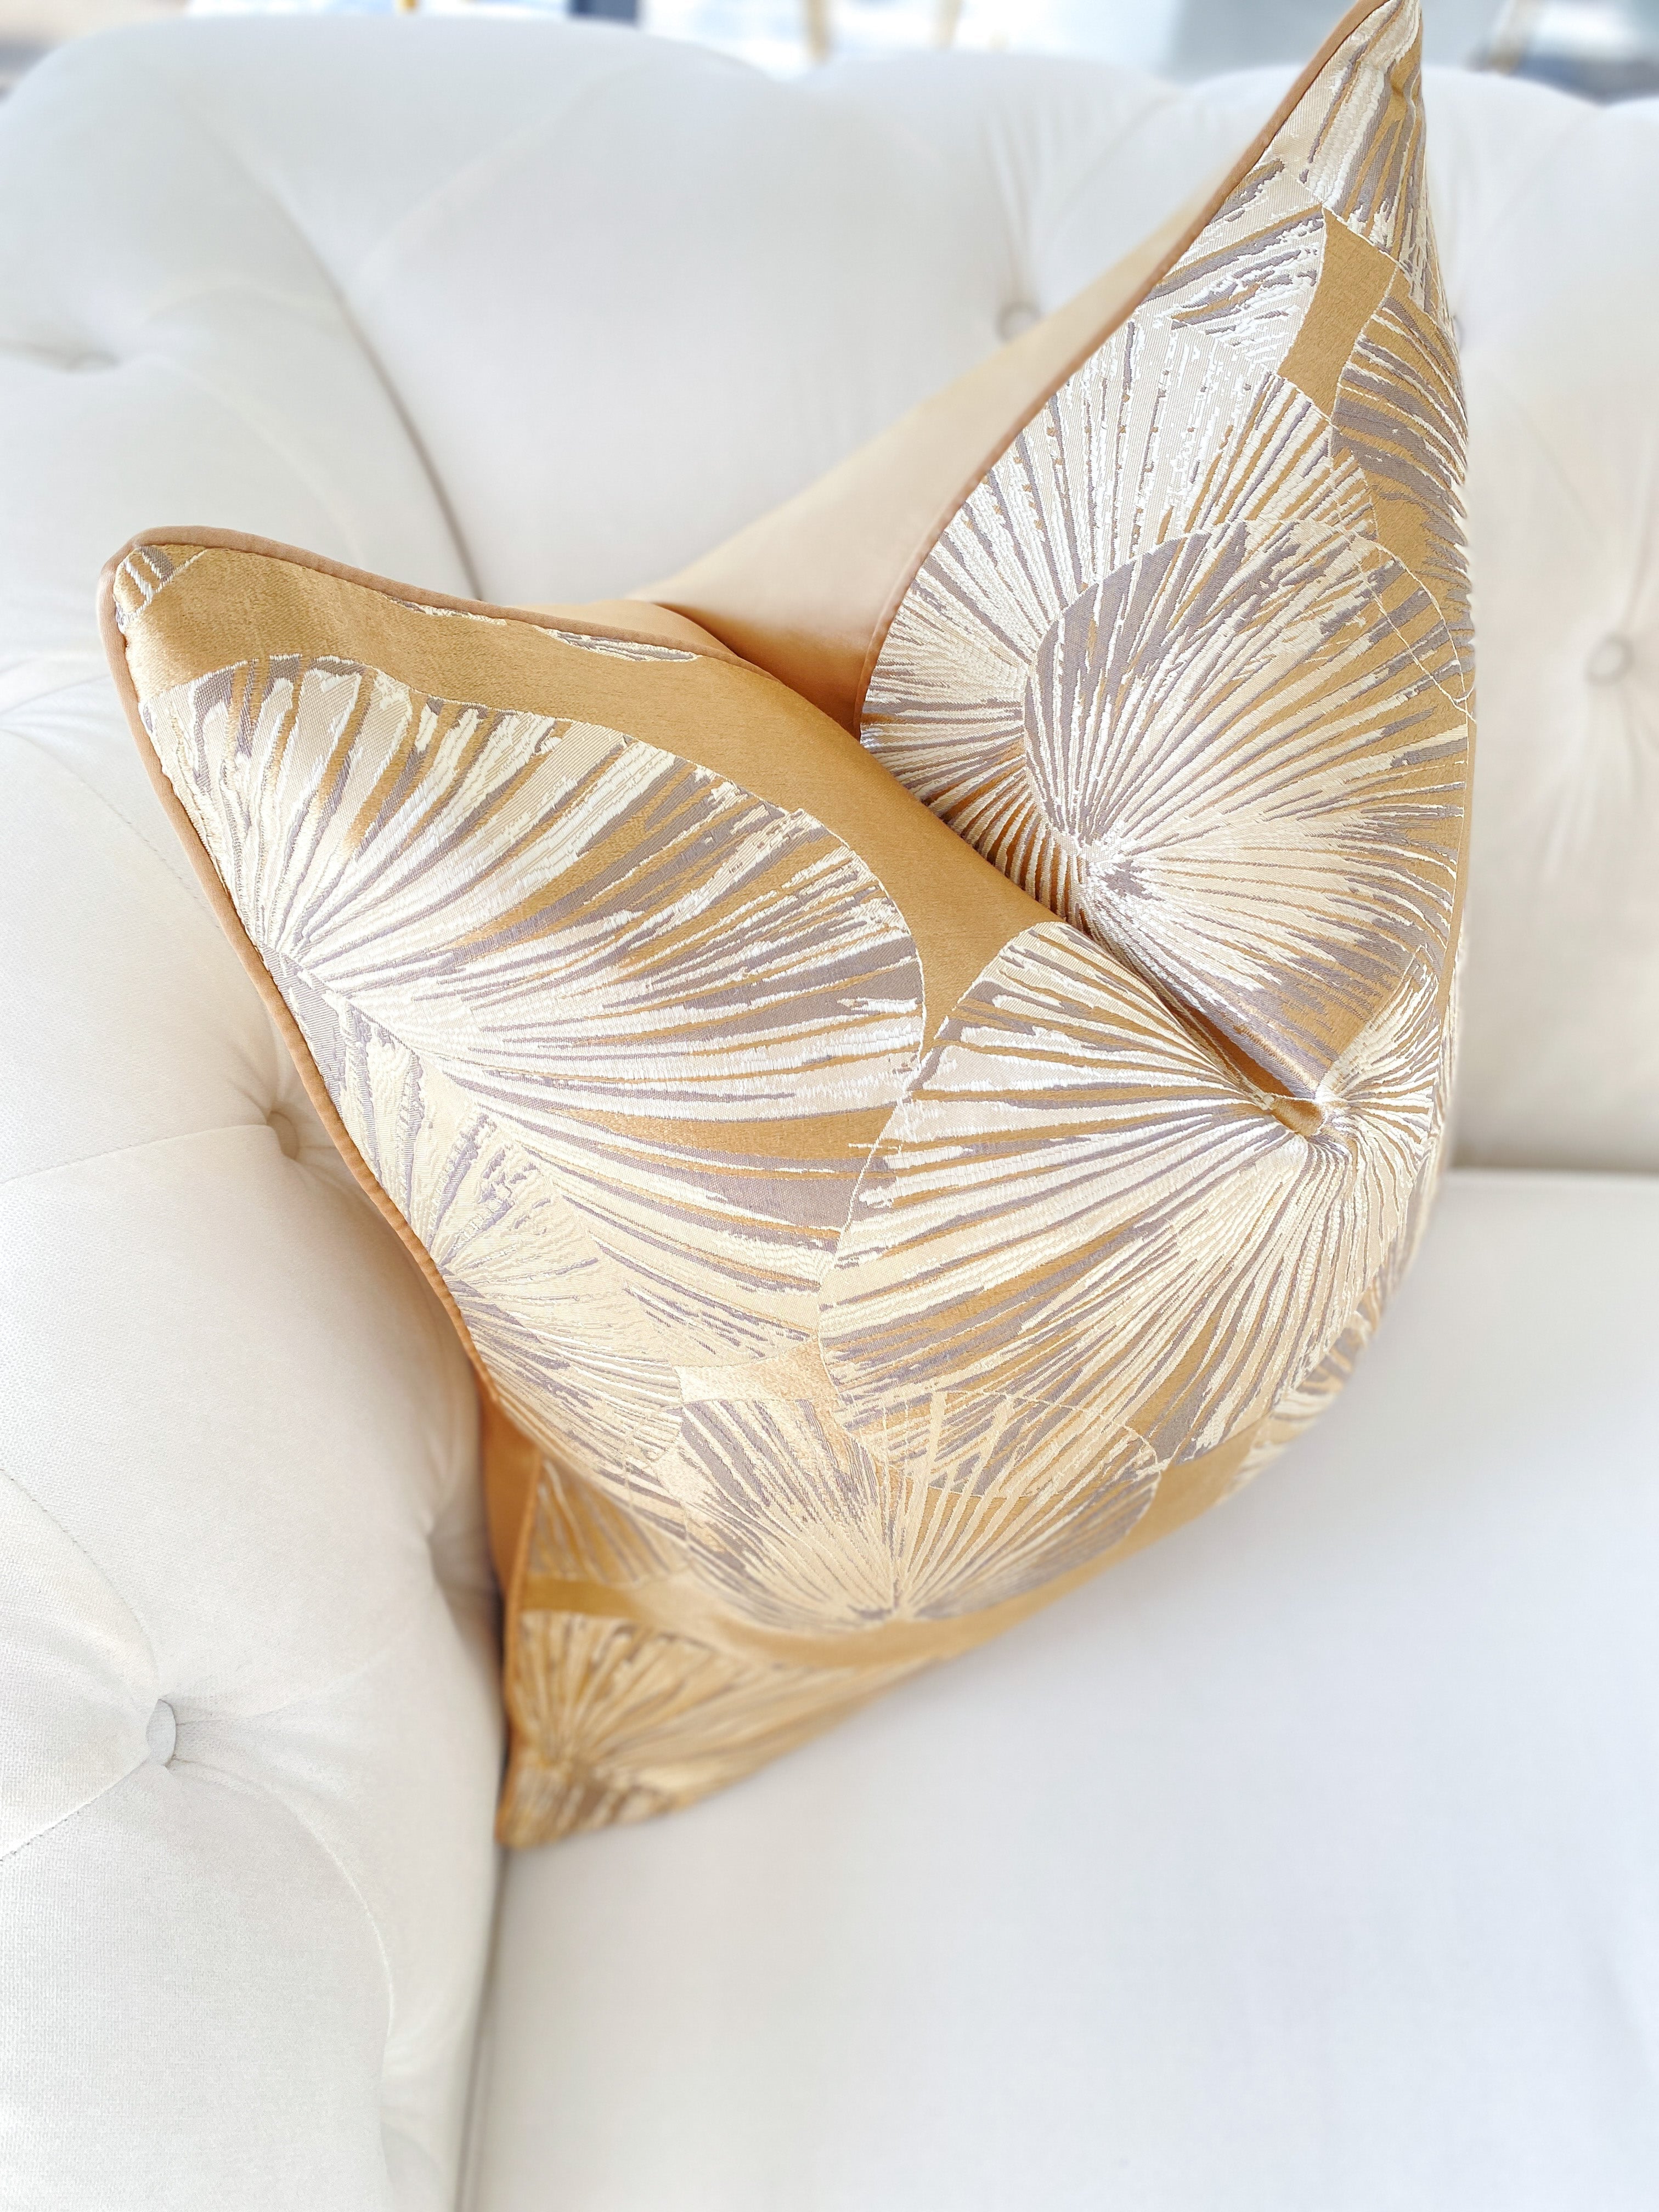 Gold & Champagne Pattern Pillow Cover - HTS HOME DECOR